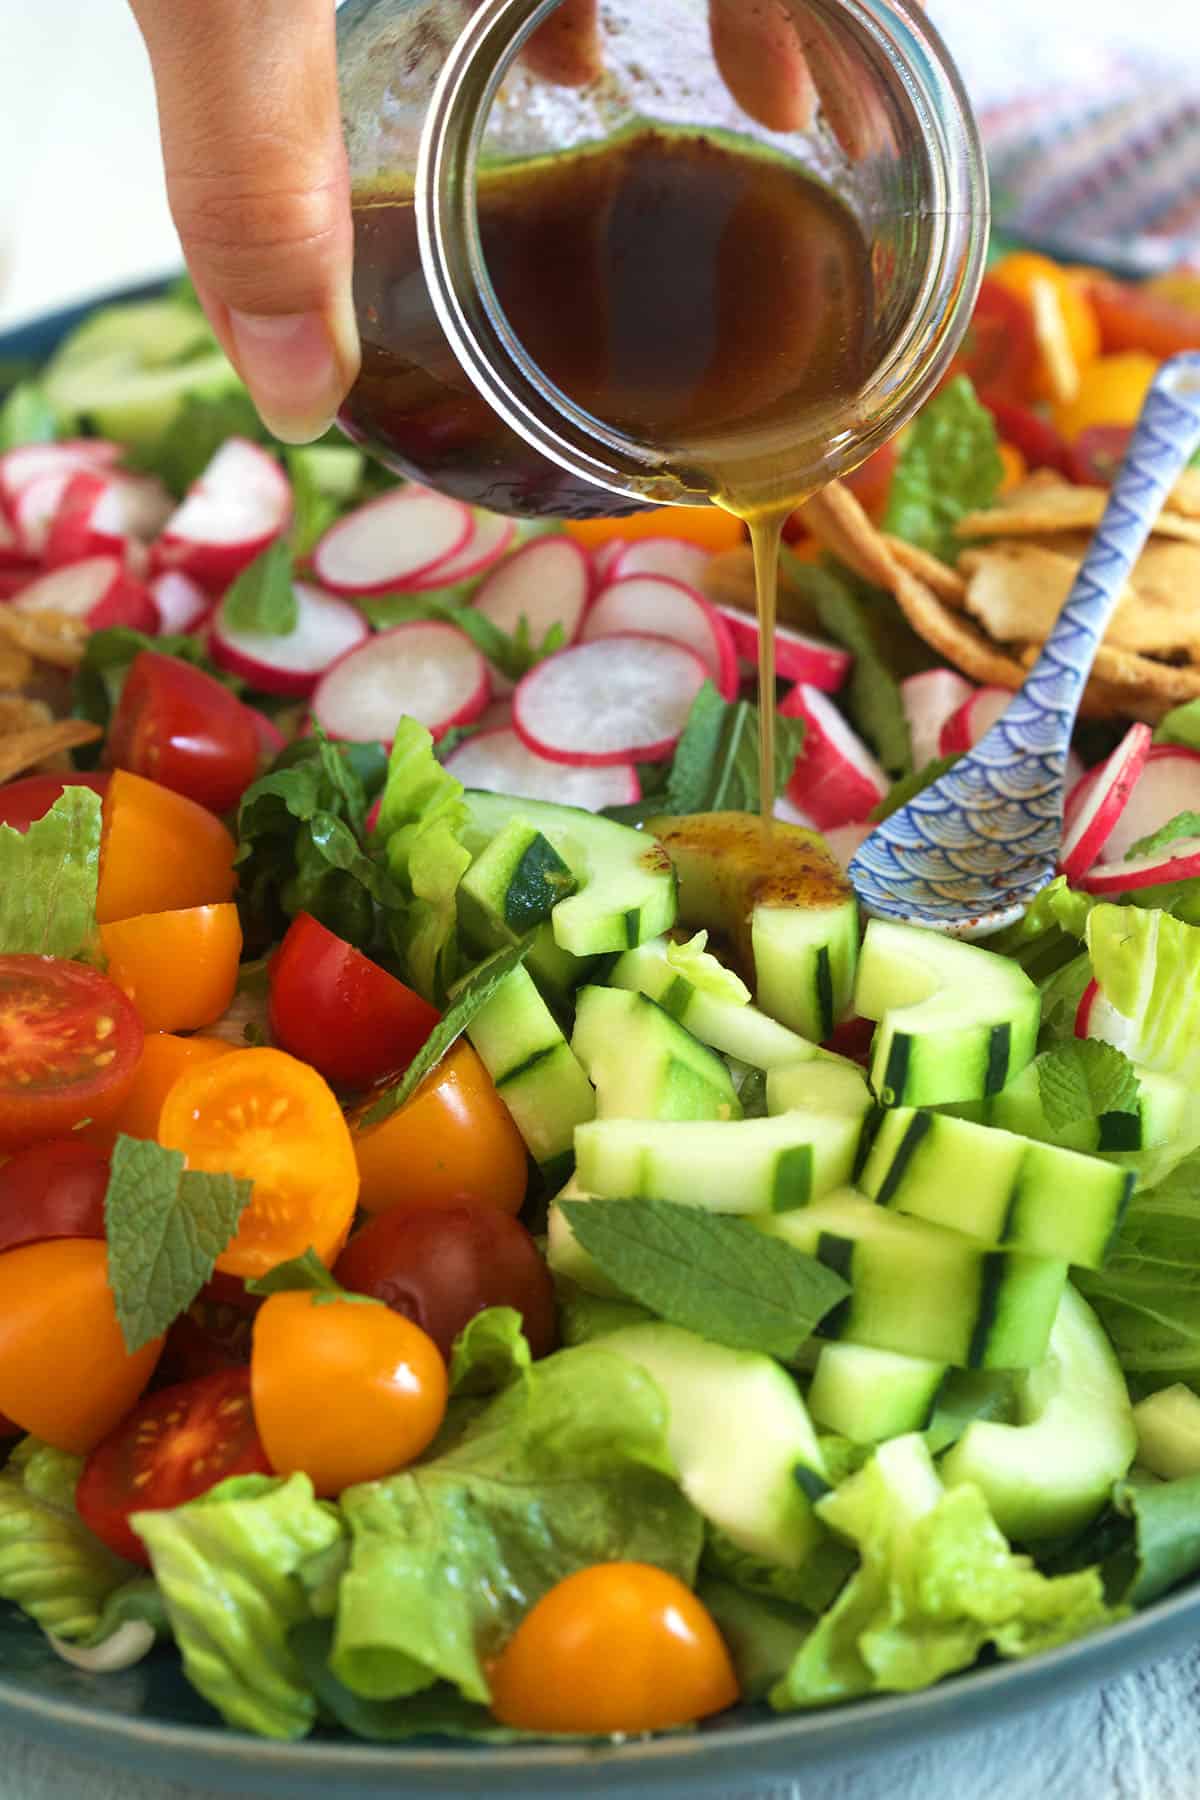 Homemade dressing is being drizzled over a fattoush salad.